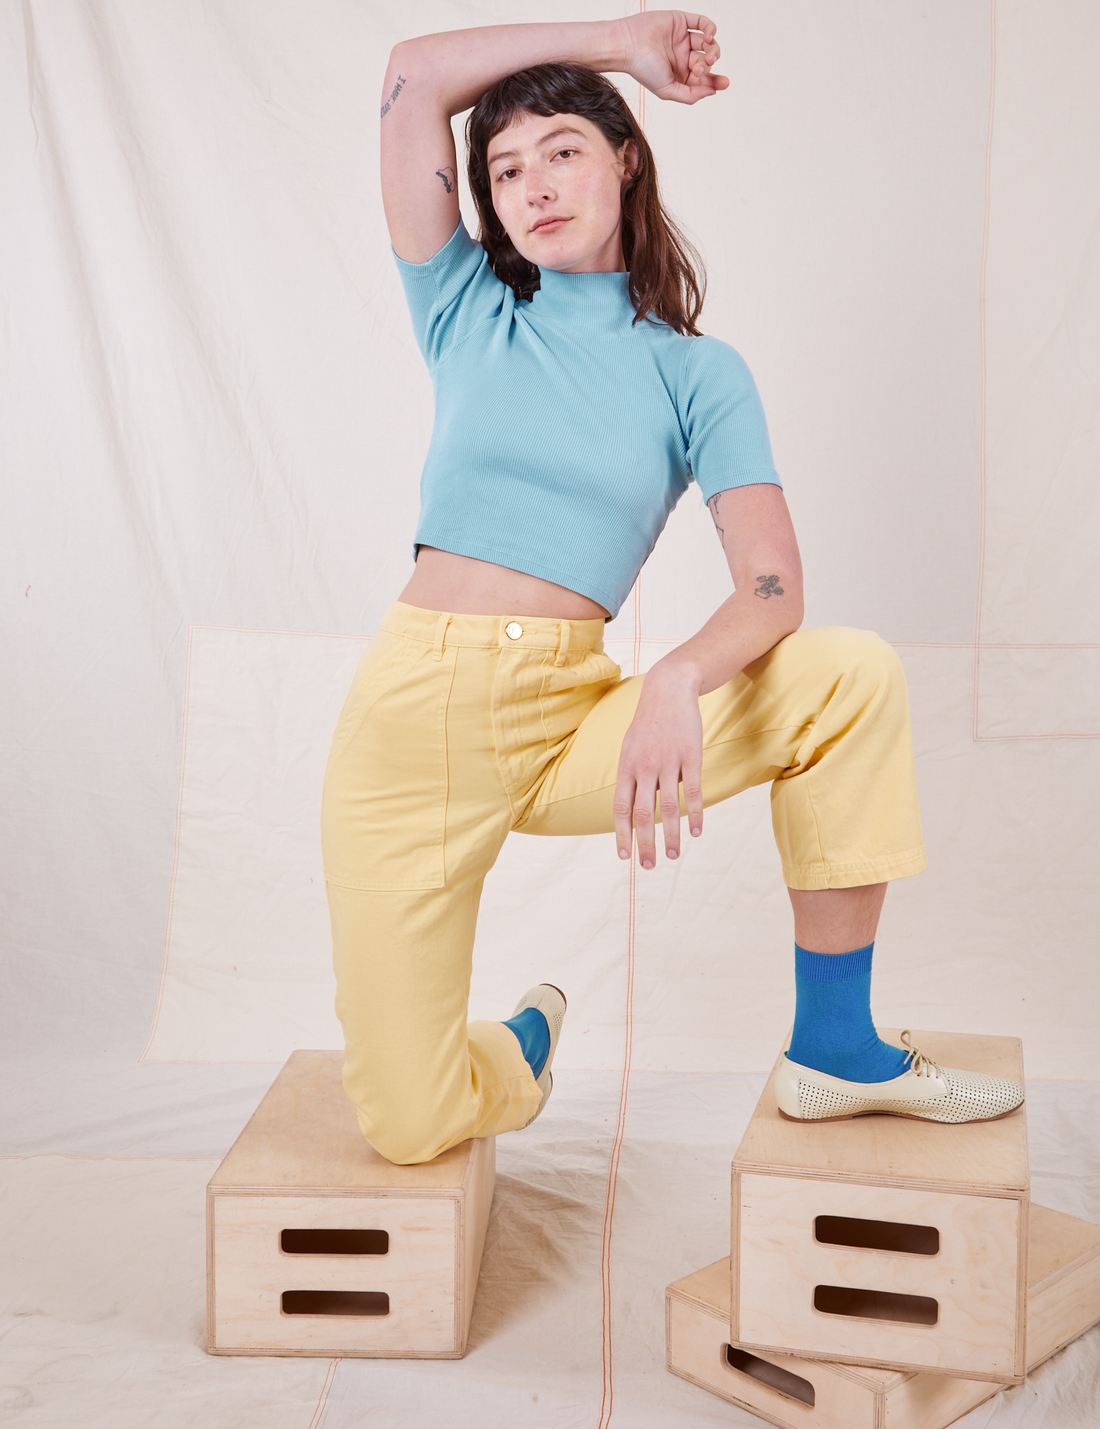 1/2 Sleeve Essential Turtleneck in Baby Blue on Alex in Butter Yellow Work Pants.